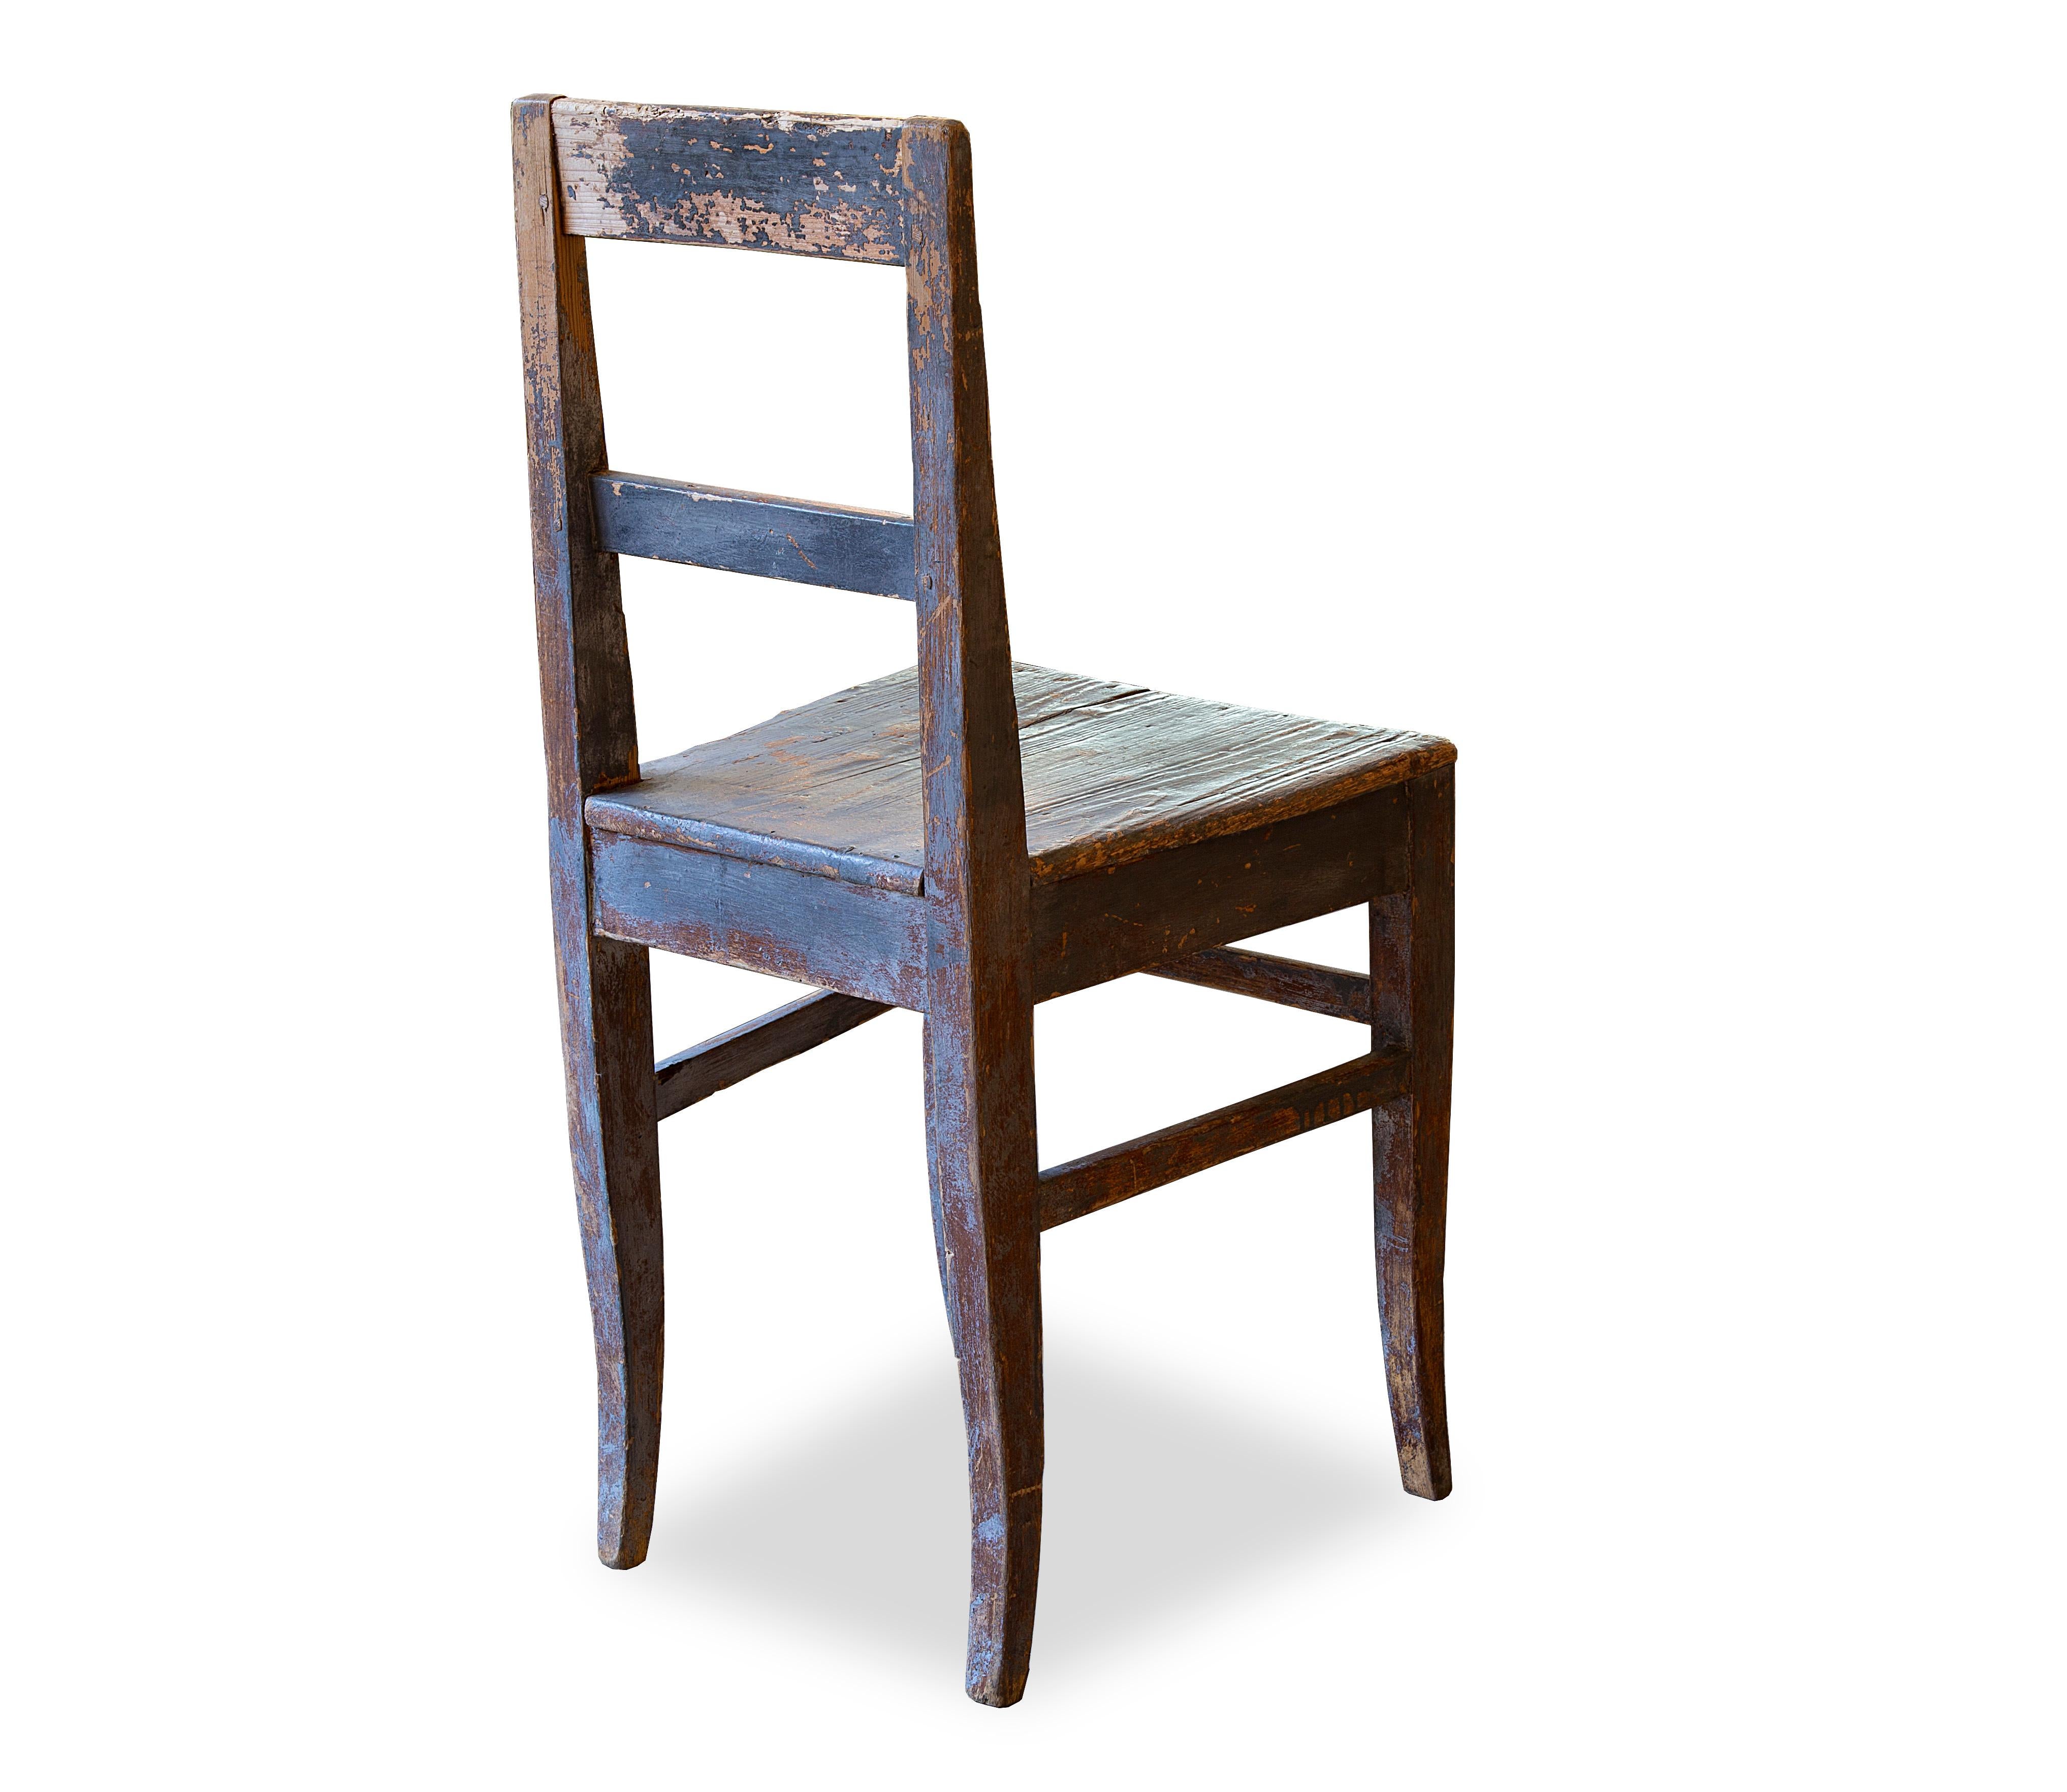 Charming 18th century primitive chair painted blue.